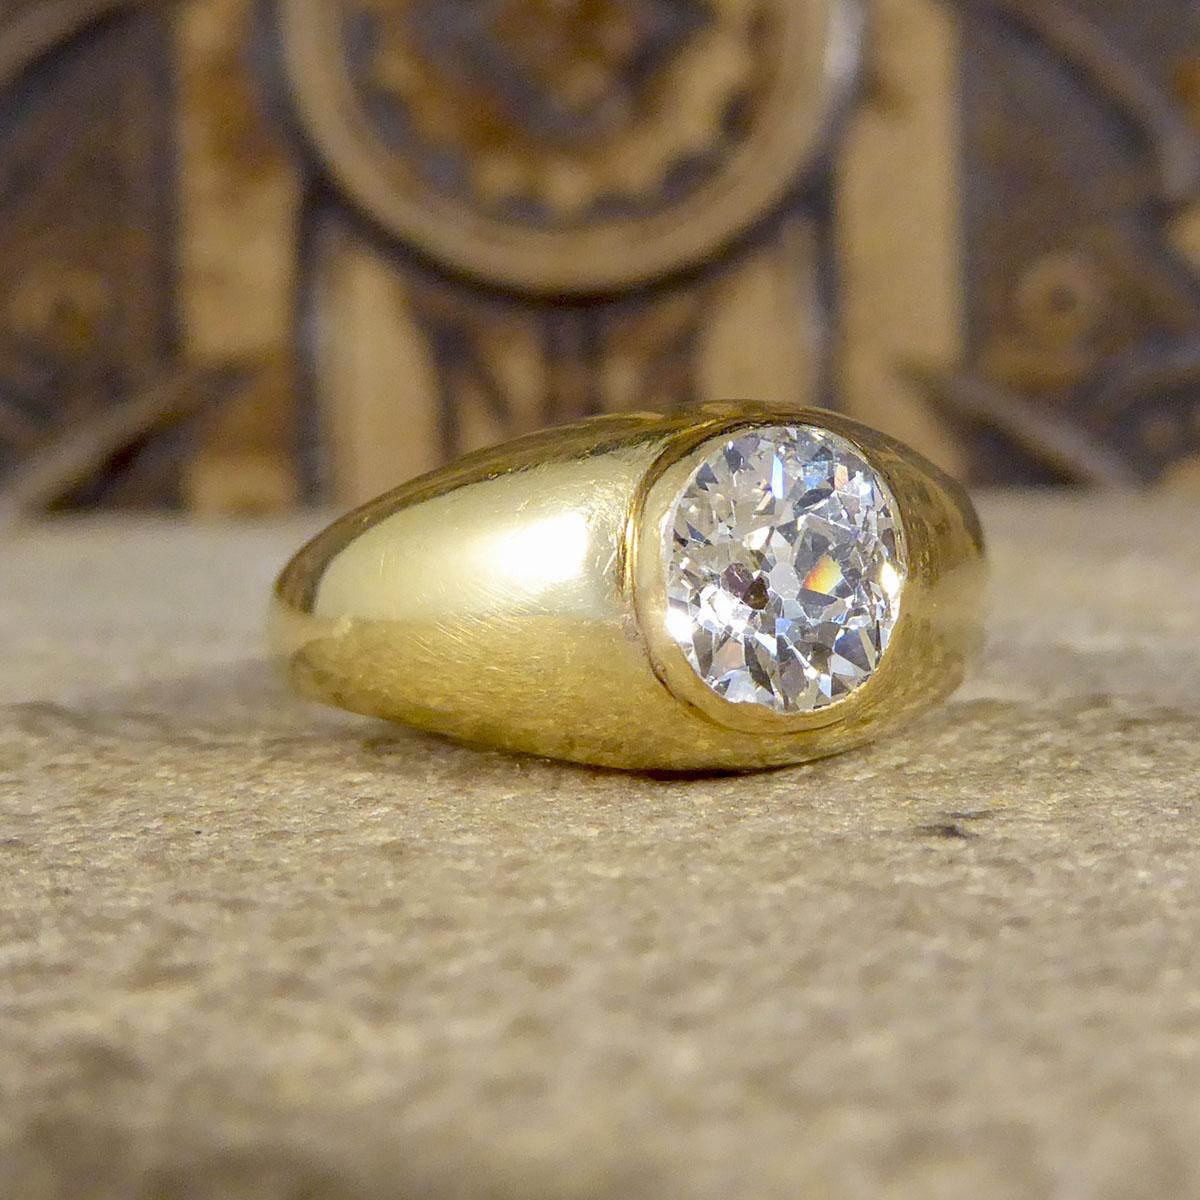 This gorgeous gypsy signet ring has a Old Cushion Cut Diamond in the setting weighing 0.85ct in a rub over setting. It has been crafted in the Late Victorian era with 18CT stamp on the inner band. A beautiful antique ring with a clear and bright